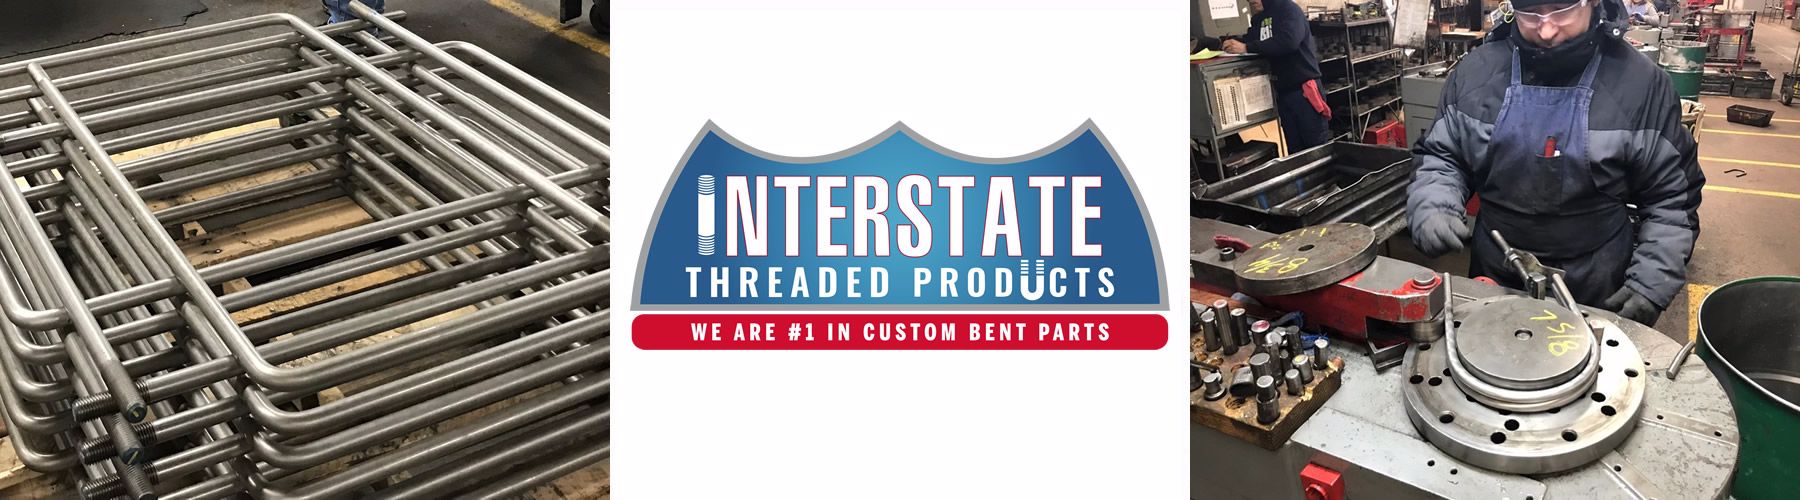 Interstate Threaded Products